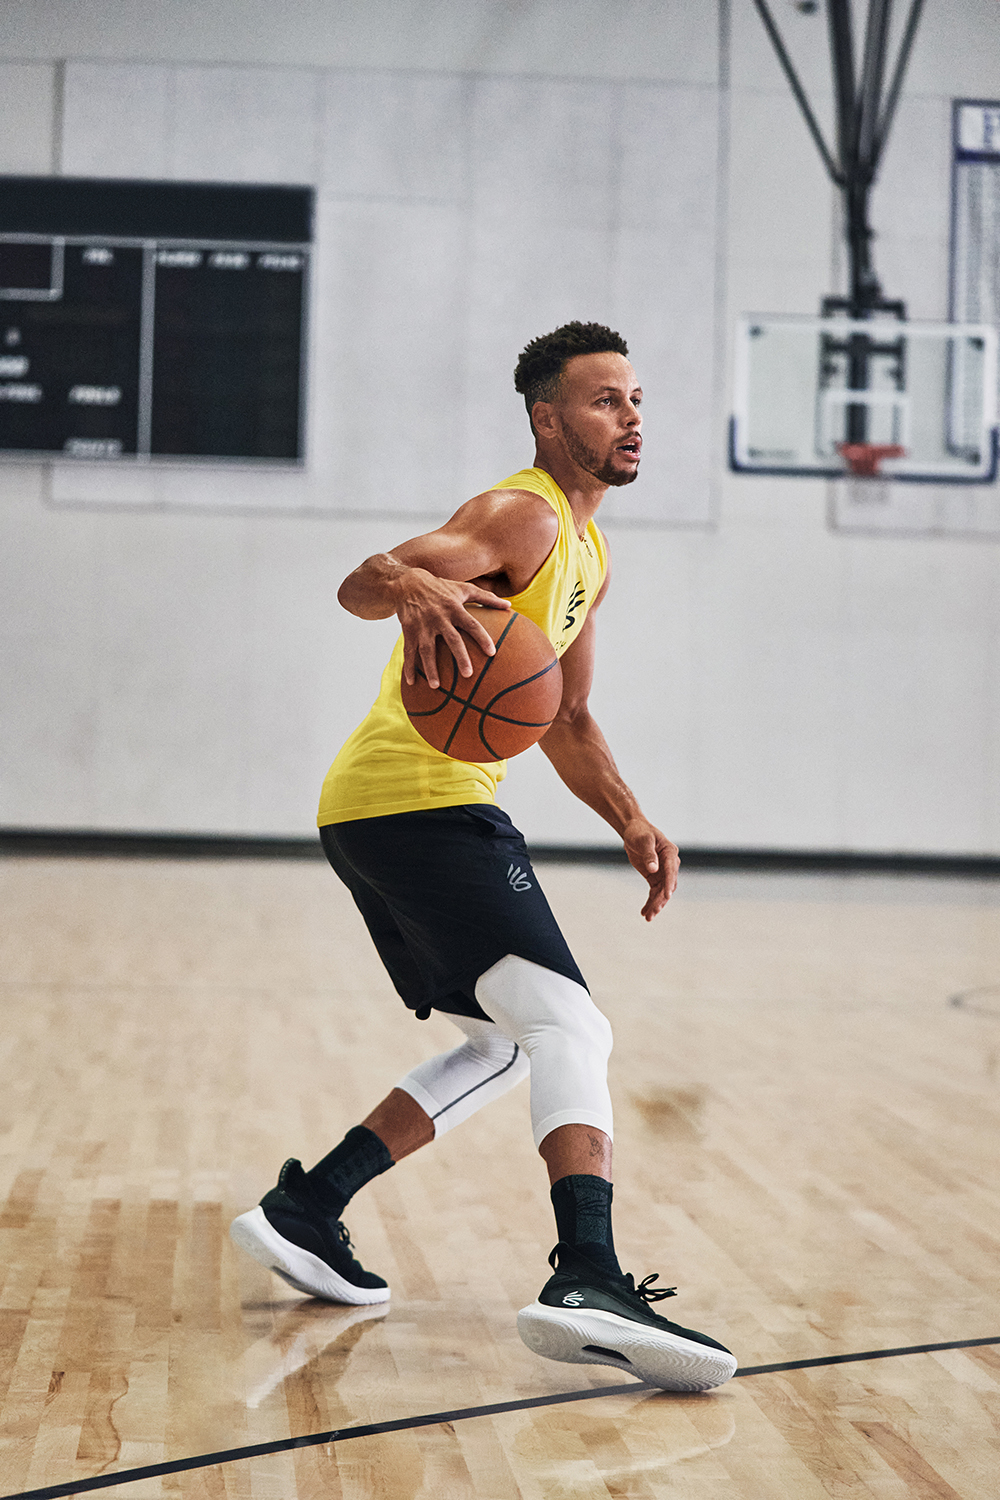 Stephen Curry's New Basketball Sneaker Features Bible Verse